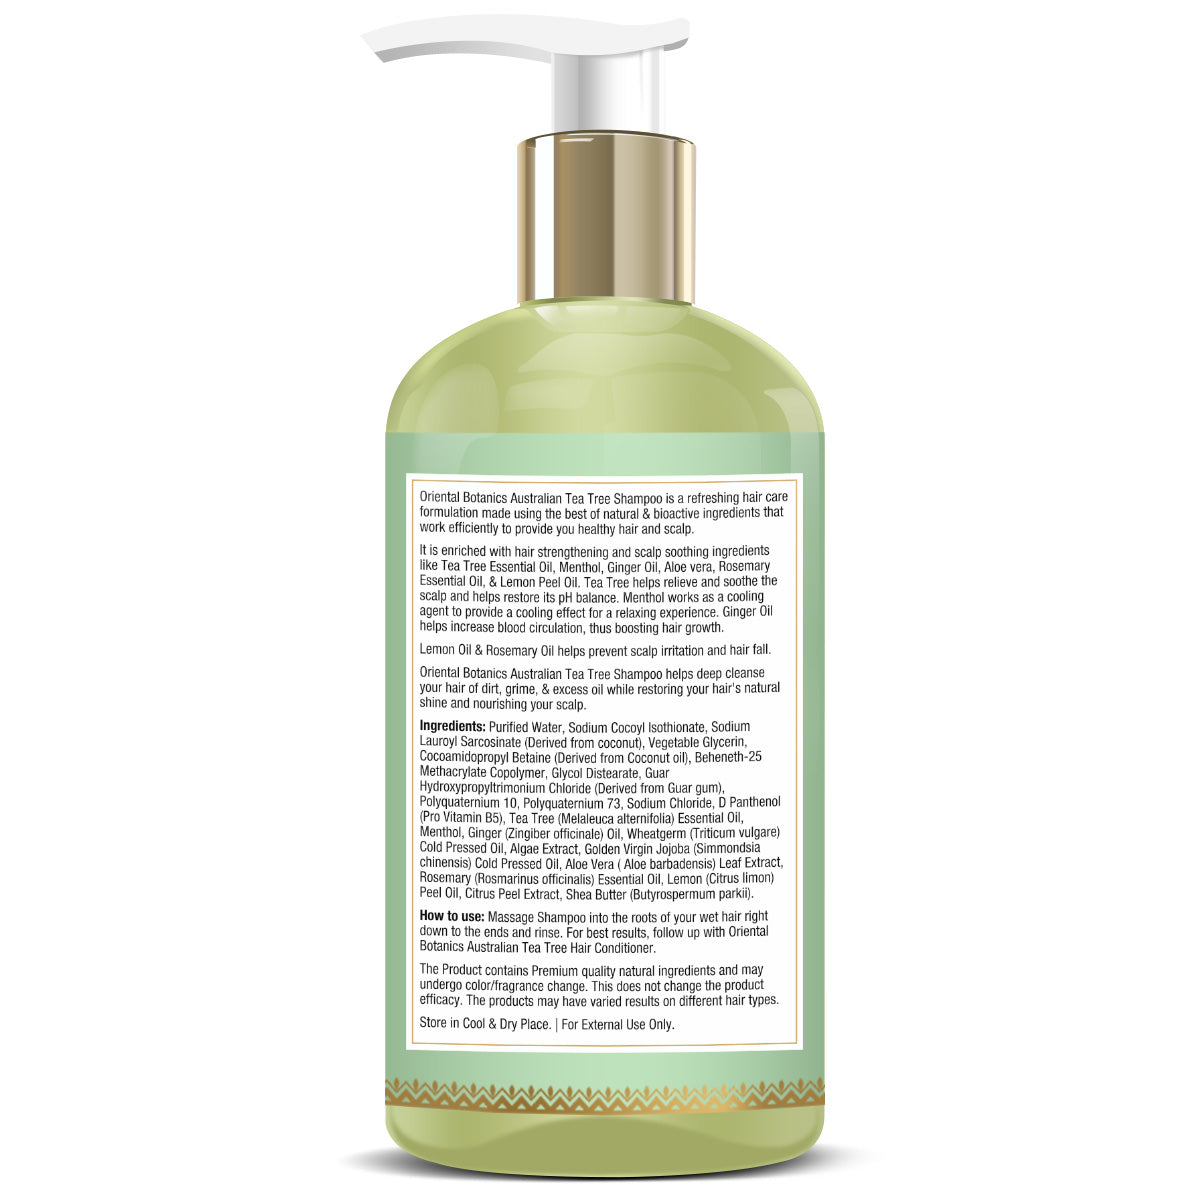 Oriental Botanics Australian Tea Tree Hair Shampoo - With Aloe Vera, Shea Butter - For Healthy and Nourished Hair - No Sls/ Sulphate, Paraben, Silicones, 300 ml